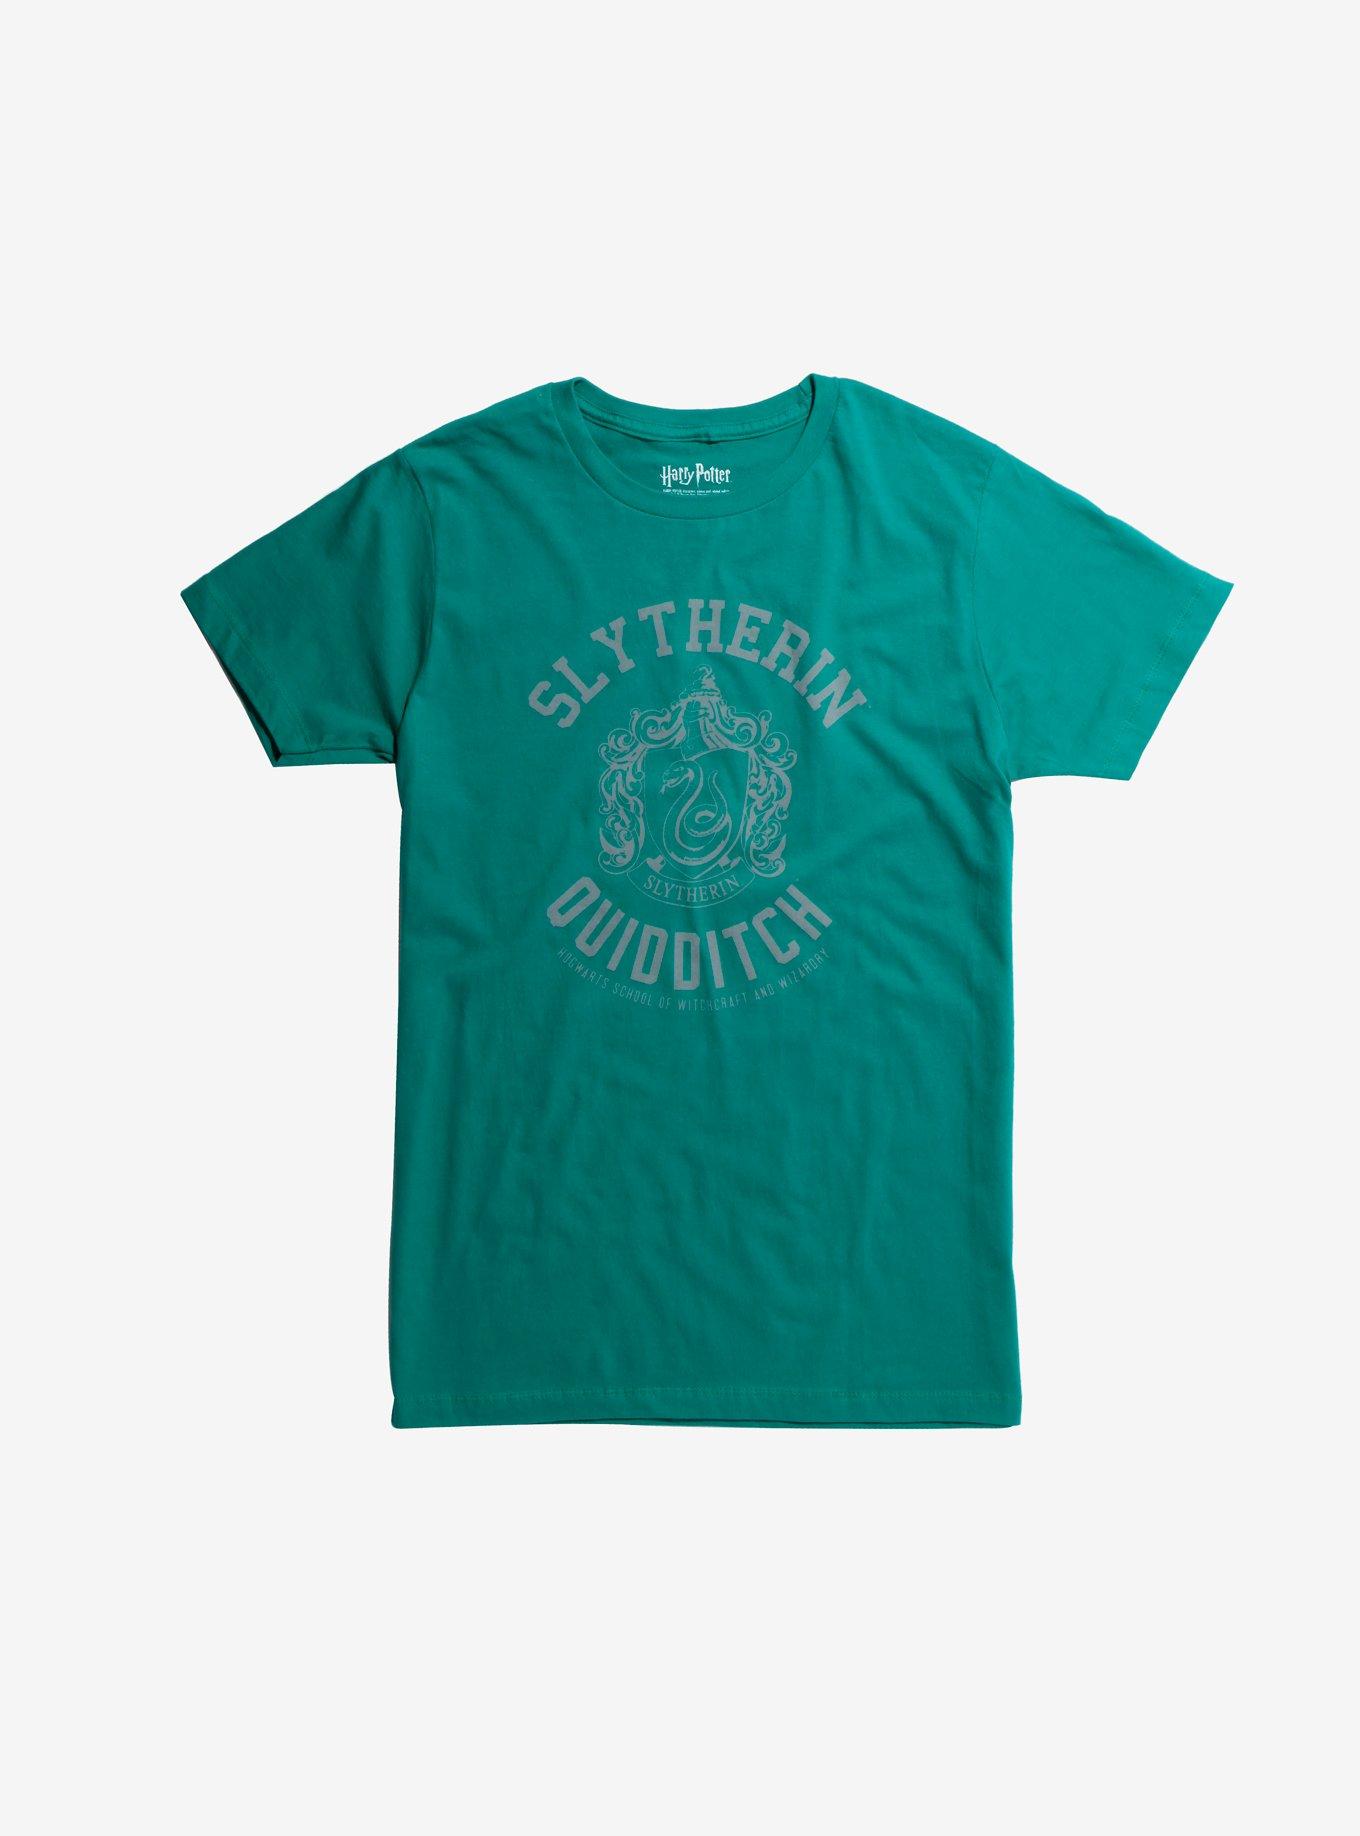 Harry Potter Slytherin Quidditch T-Shirt, GREEN, hi-res